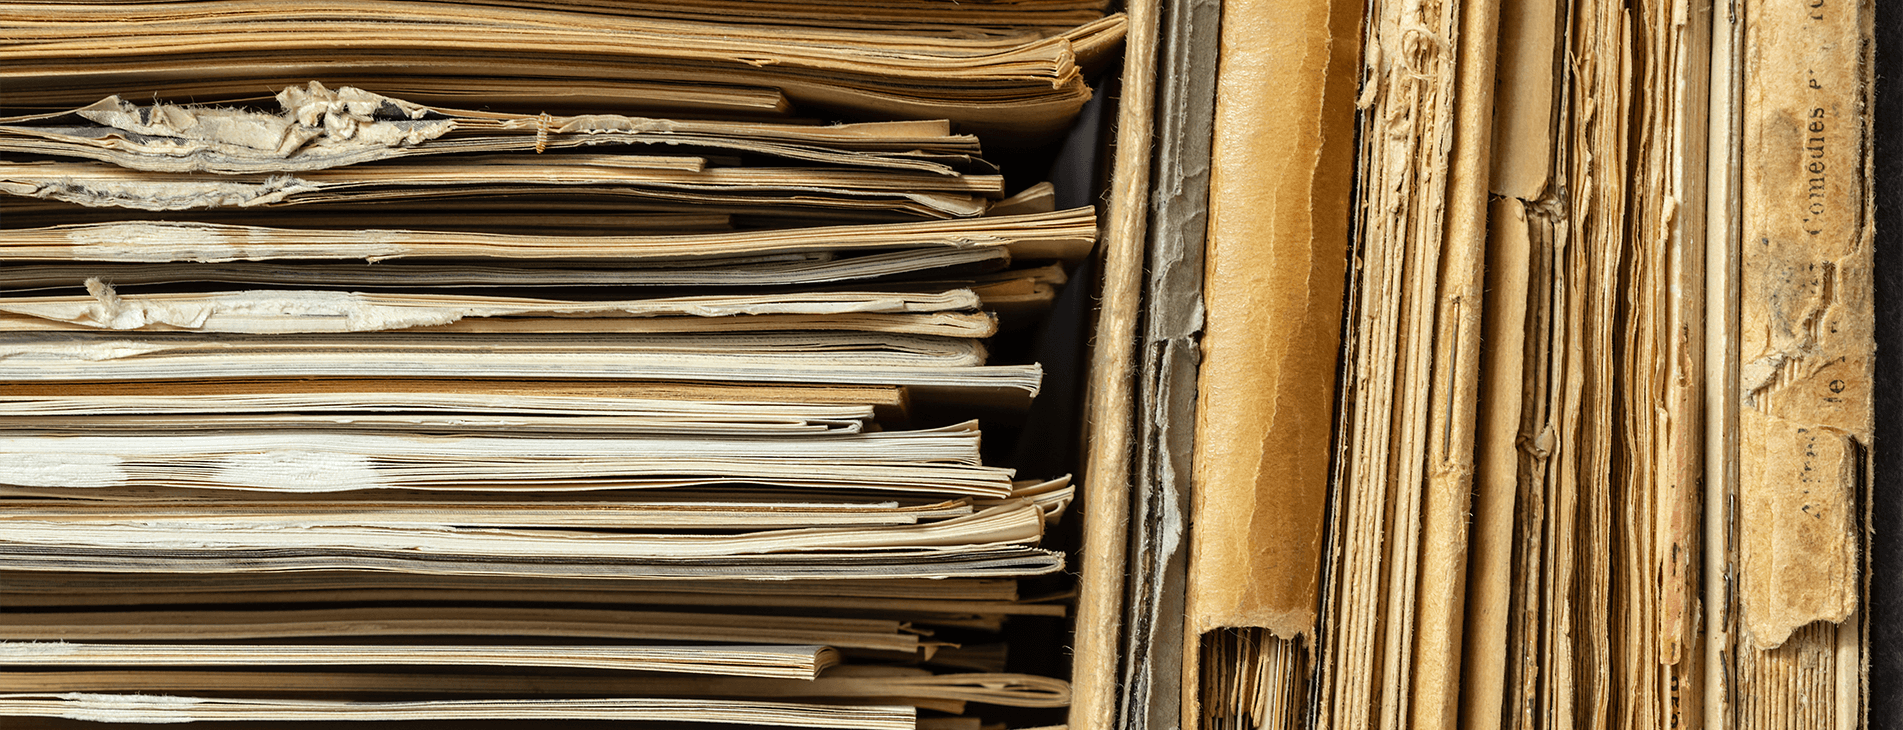 old, yellowed documents